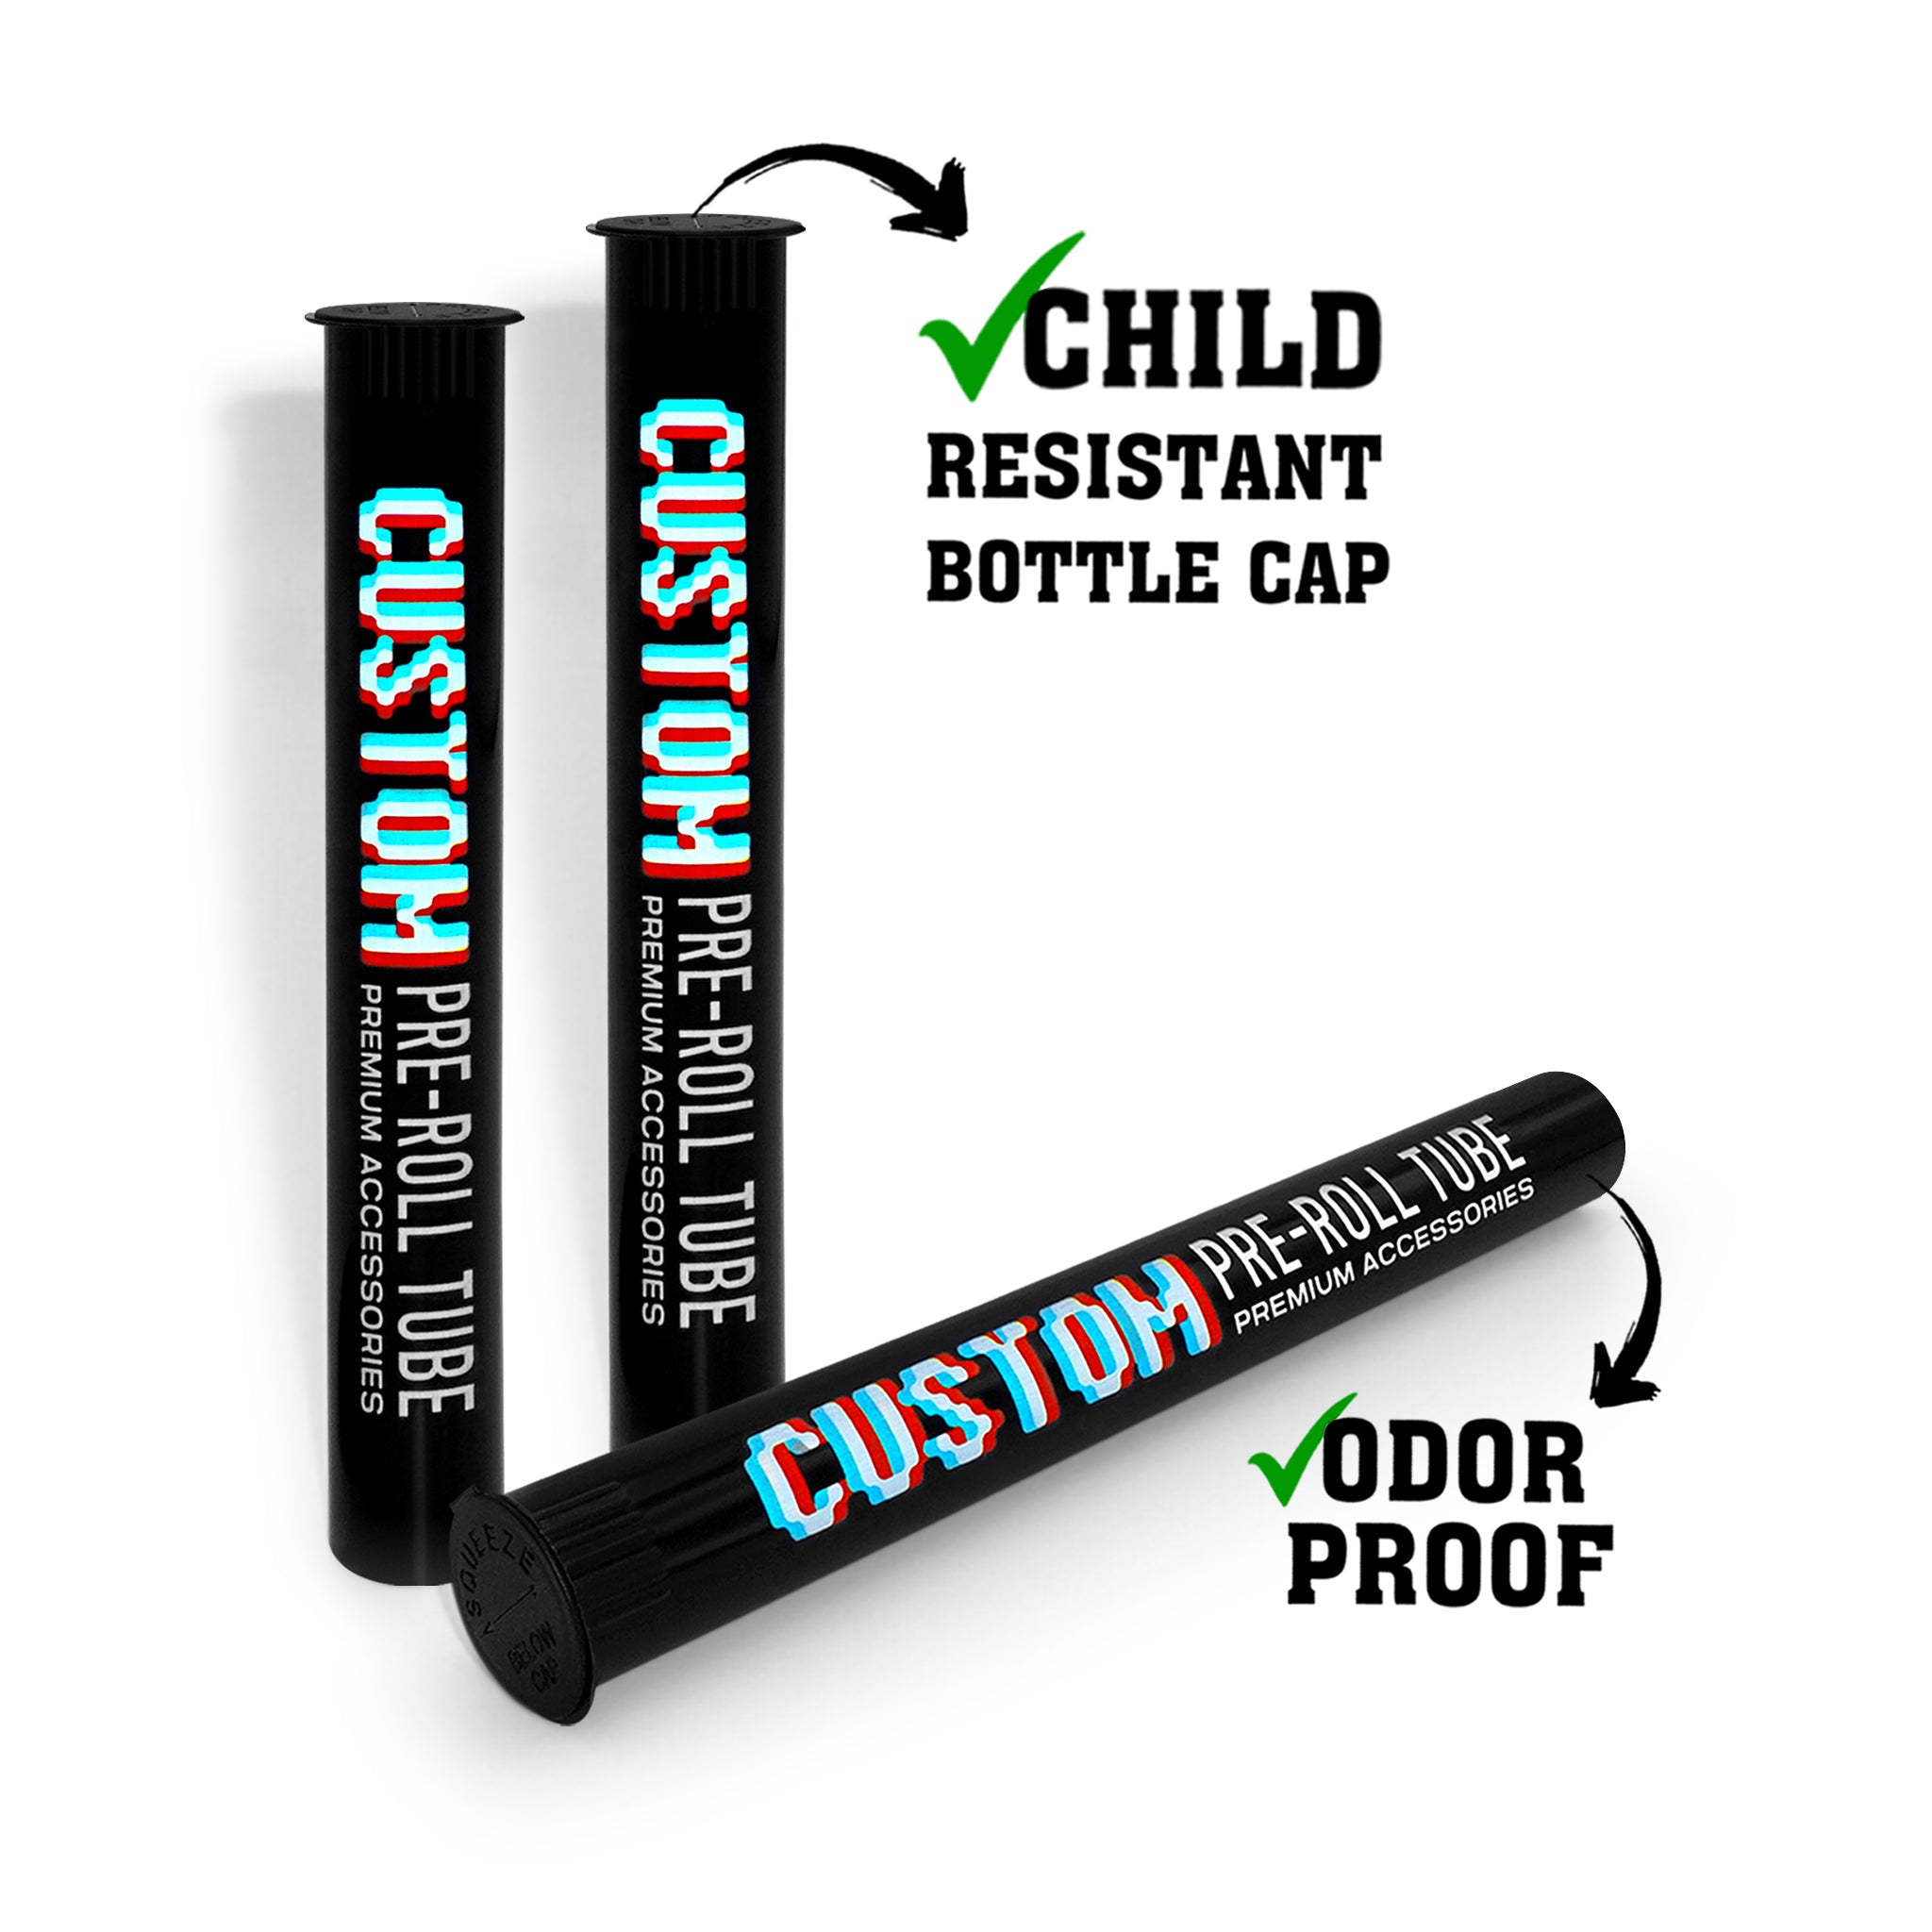 Custom Pre Rolled Plastic Tube With Child Resistant Cap